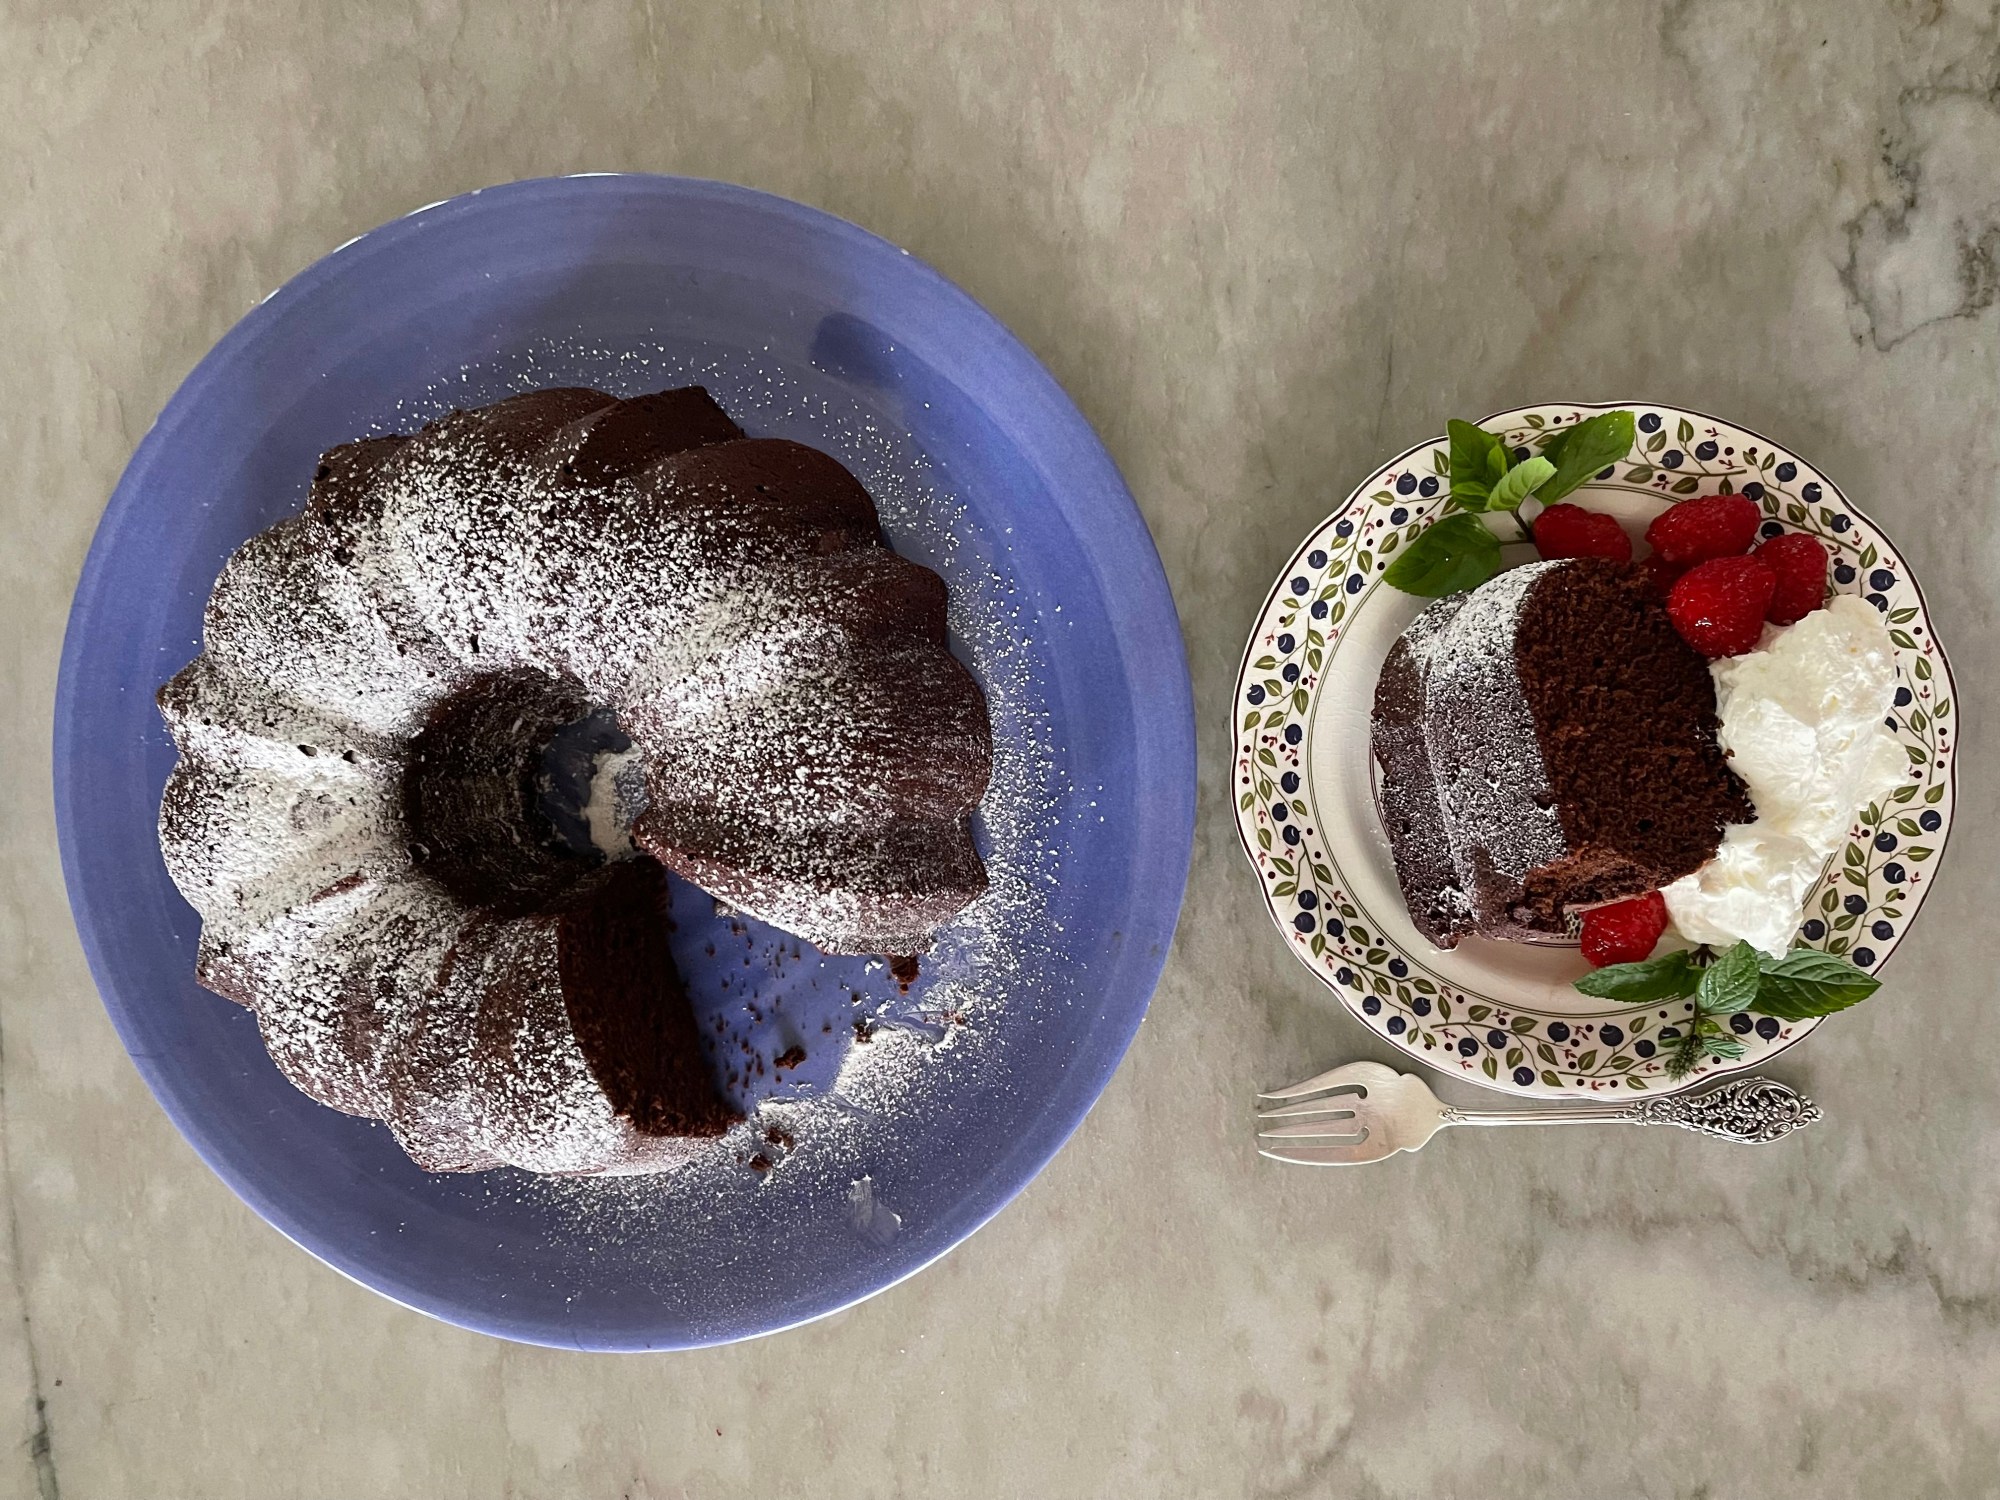 Chocolate Bundt Cake can be simply dusted with powdered sugar, as shown here, or topped with chocolate drizzle-style frosting. (Photo by Cathy Thomas)